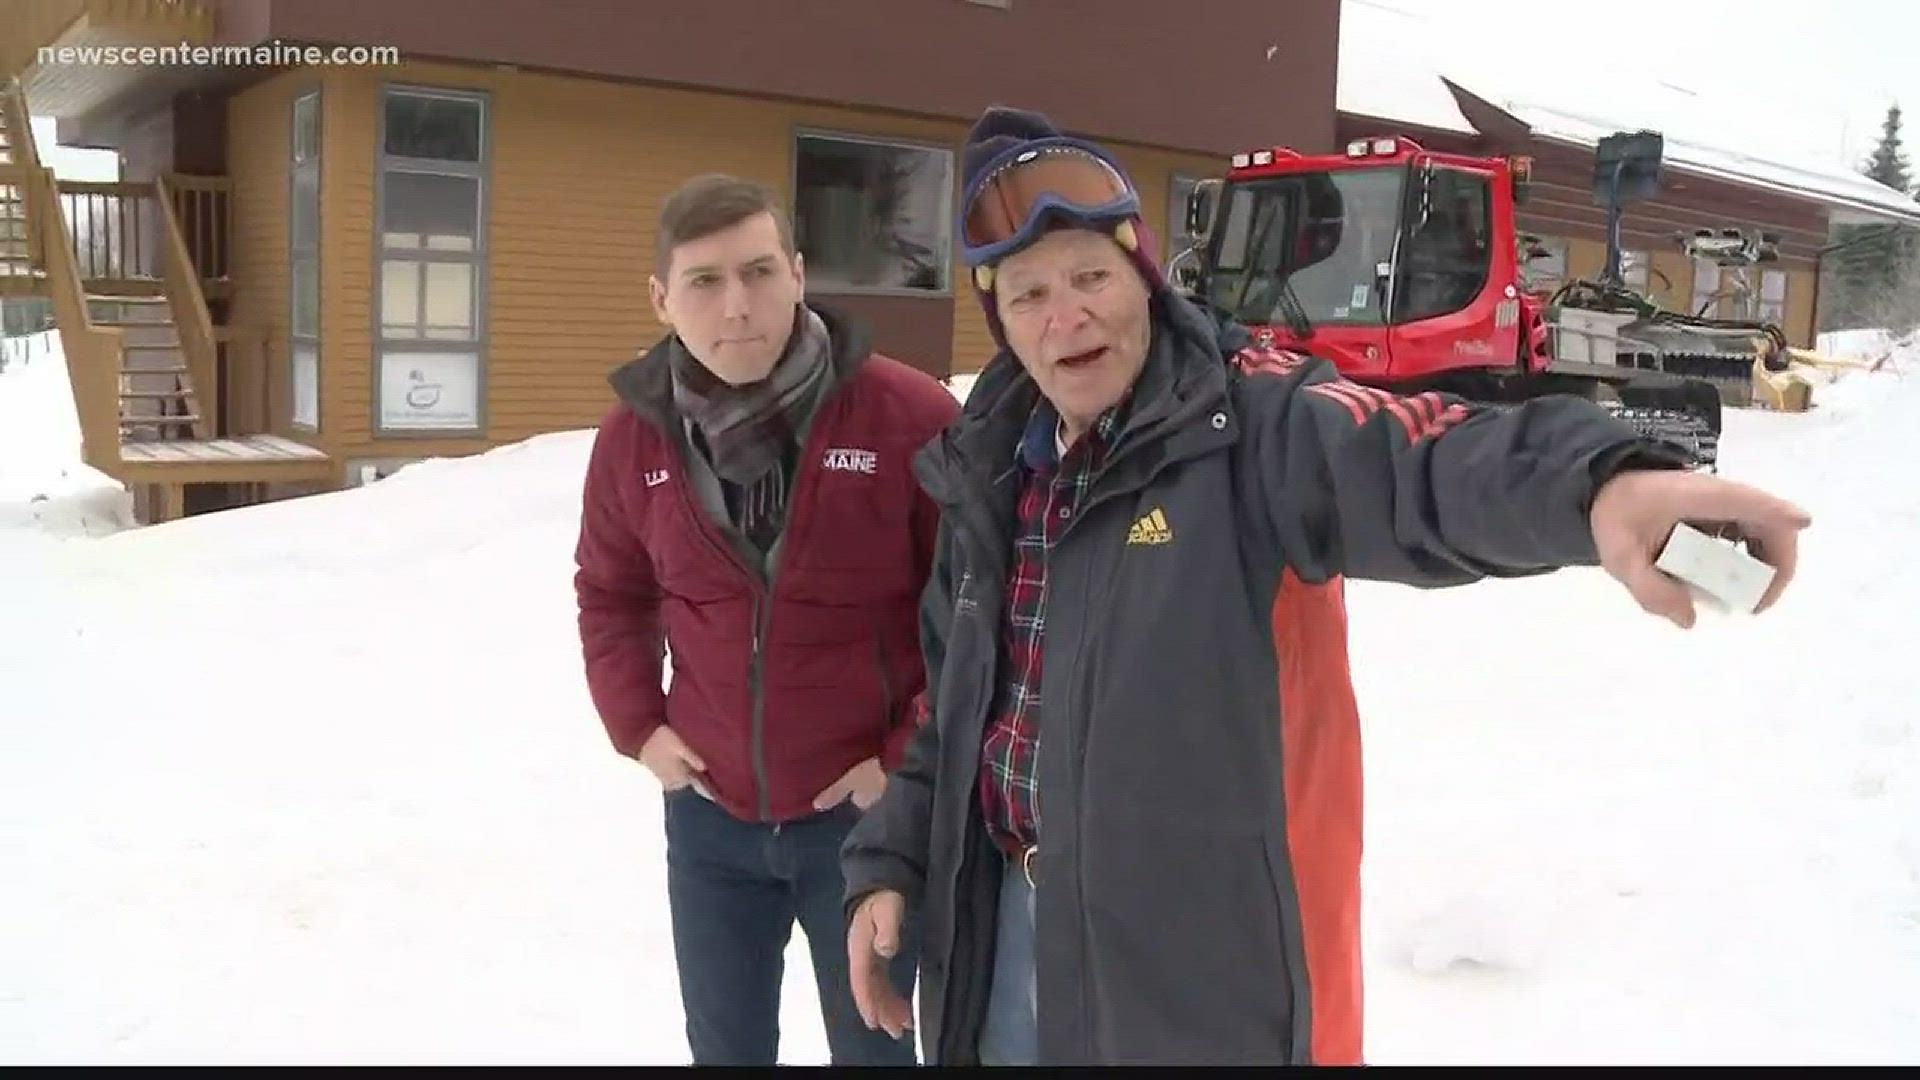 At 91 years old, Lucien Theriault pours as much sweat into his job as electrical engineer at the Olympic training center in Fort Kent as any of the athletes